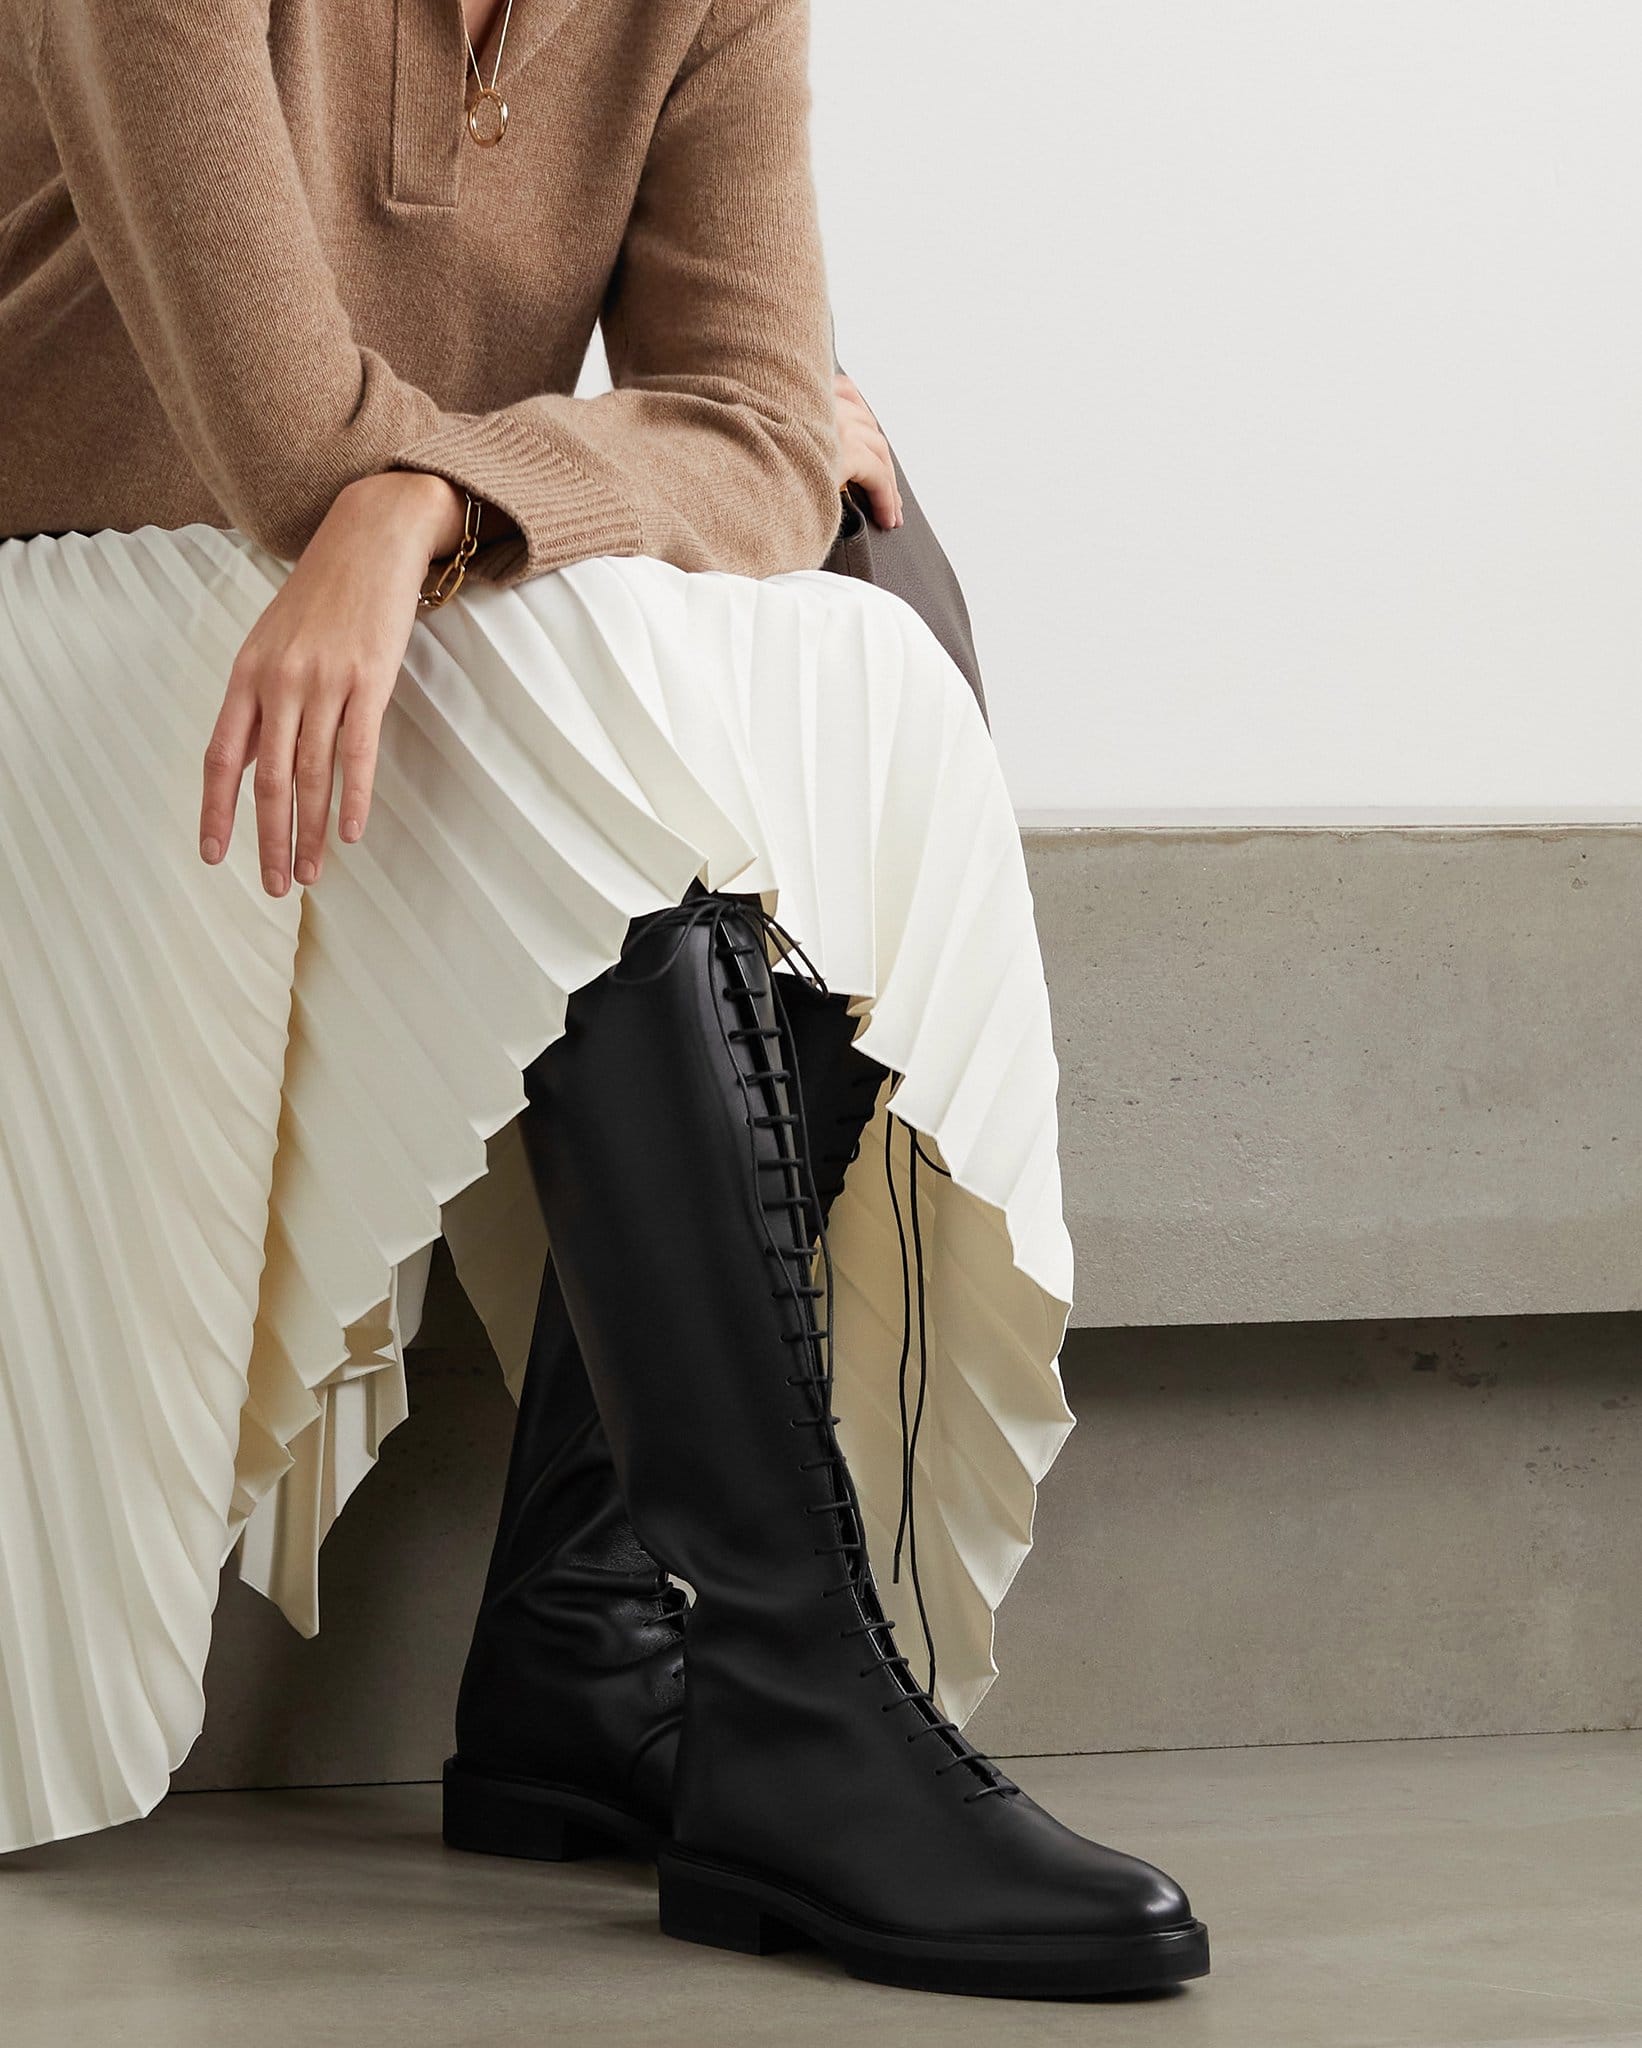 These timeless Khaite York boots are minimally designed from smooth black leather with lace-up front and short heels